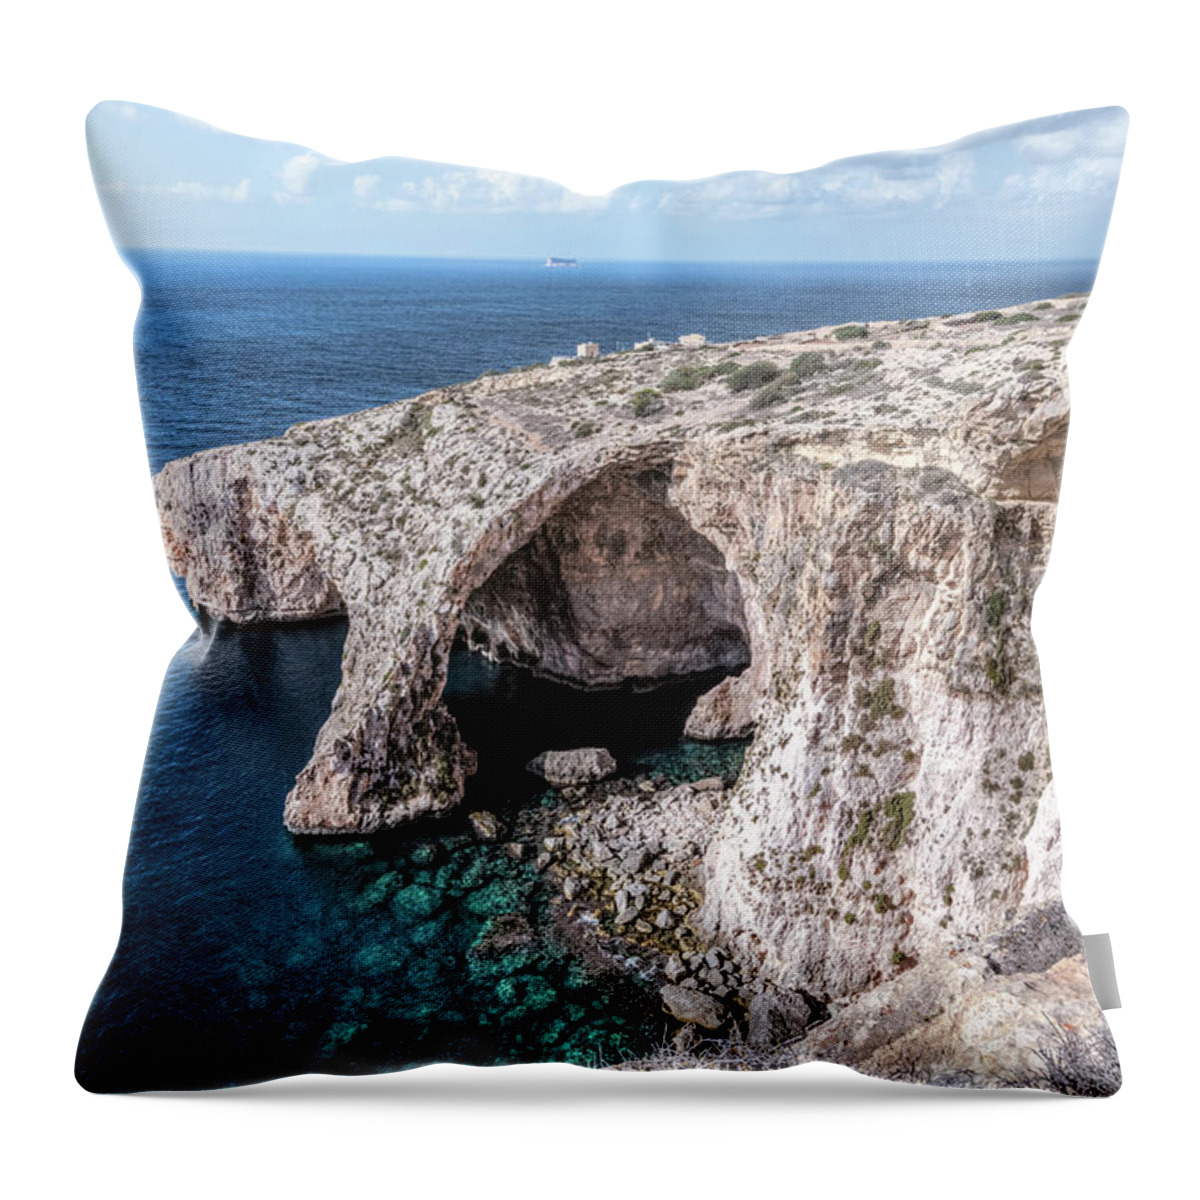 Blue Grotto Throw Pillow featuring the photograph Blue Grotto - Malta #1 by Joana Kruse